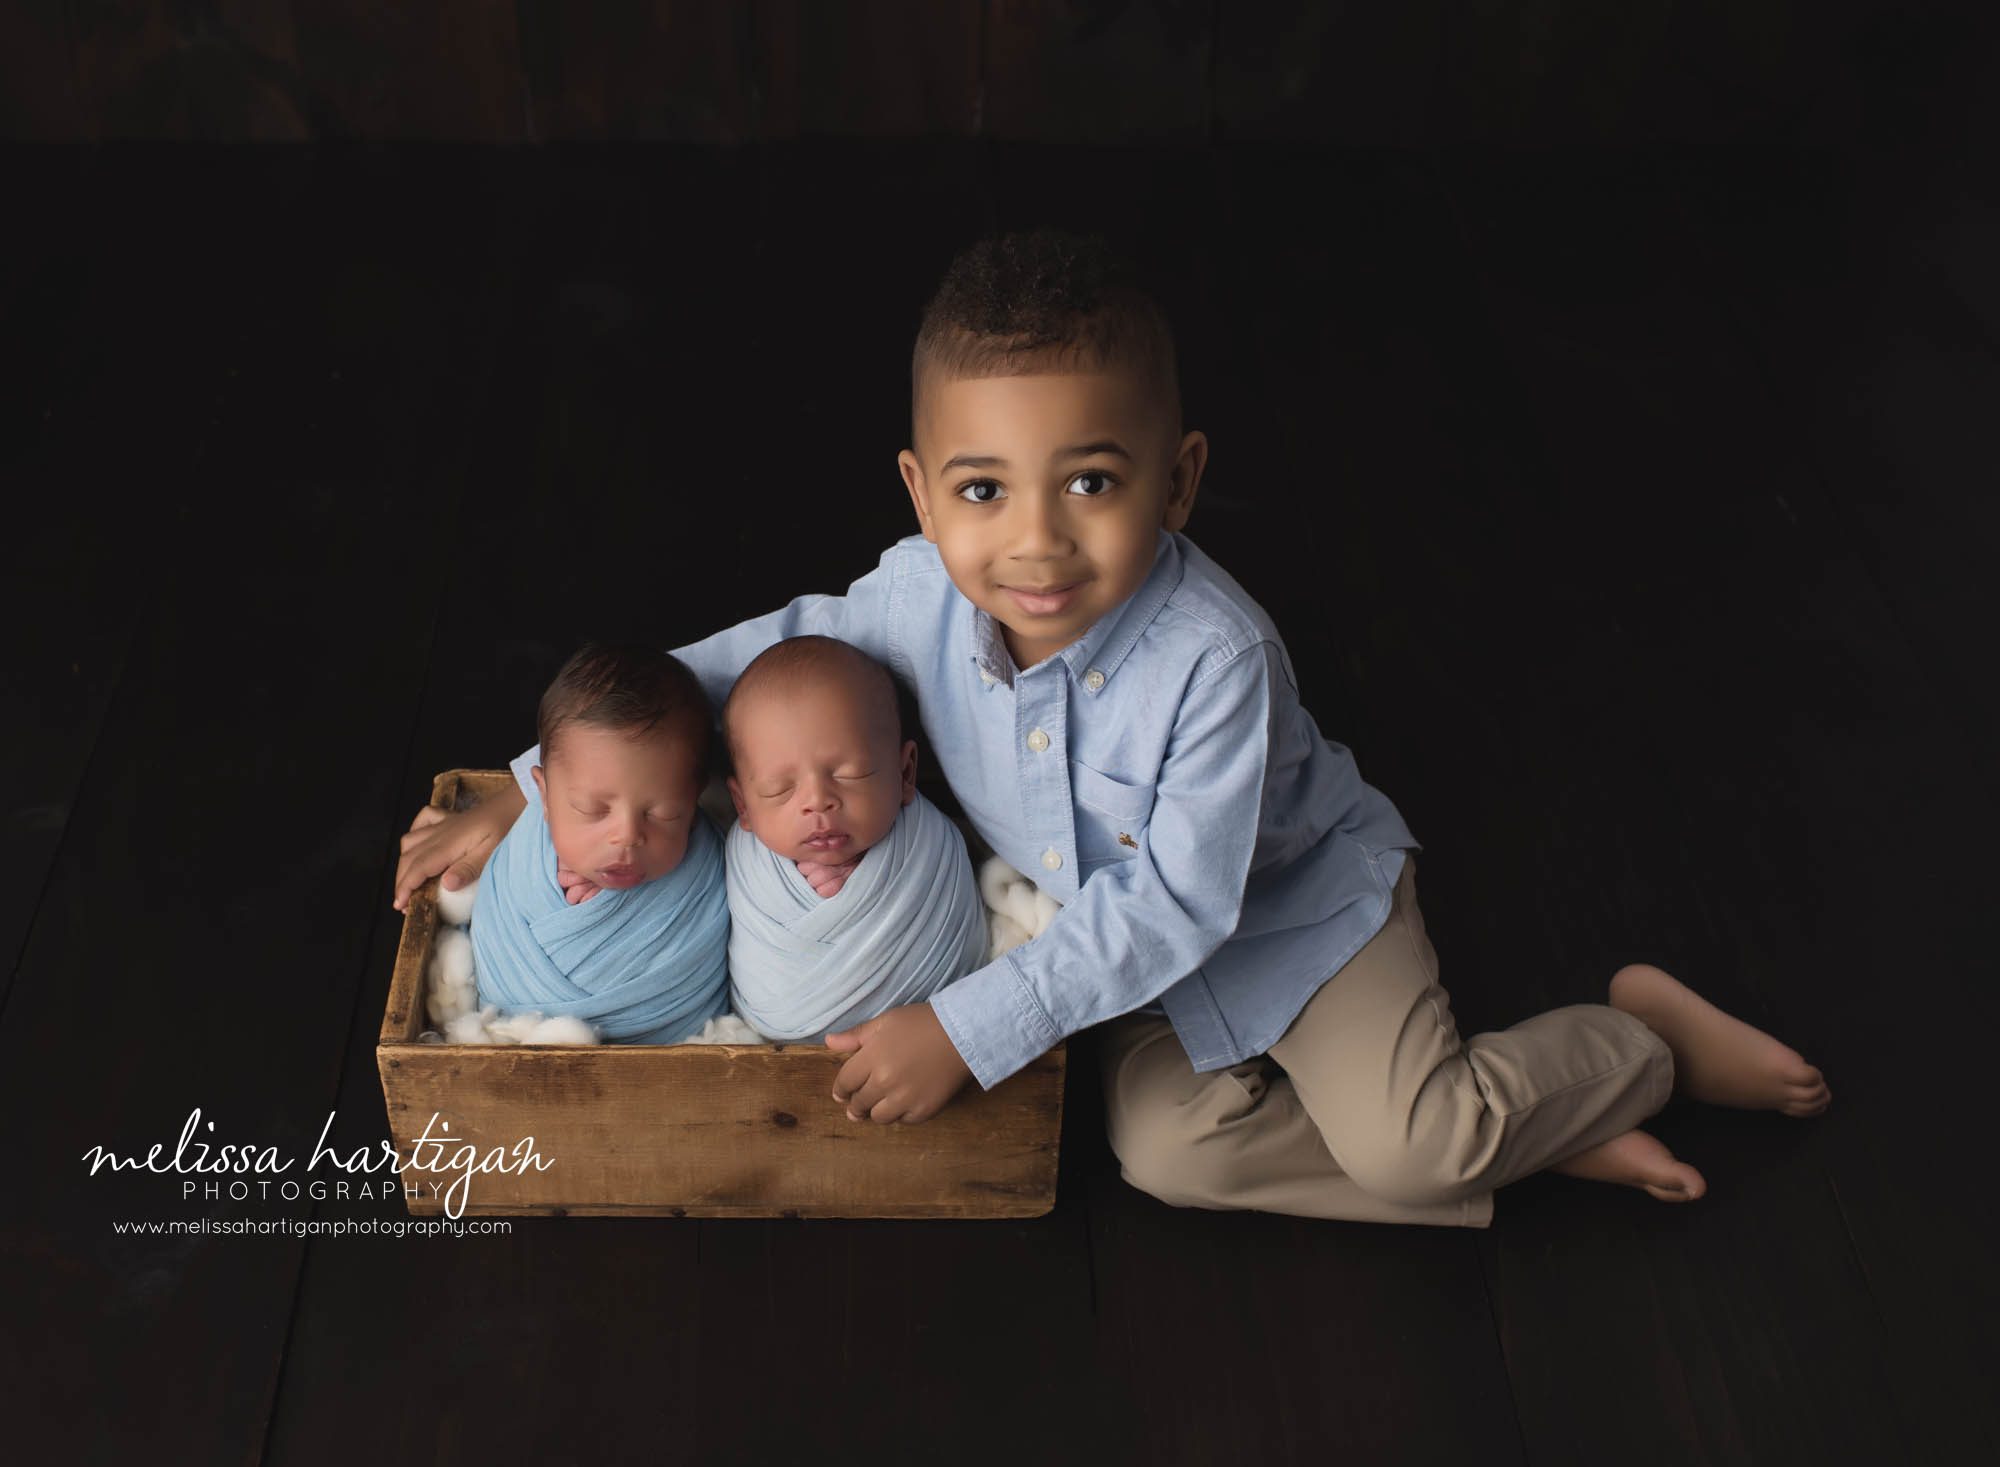 big brother sitting next to sooden crate with twin baby boys brothers wrapped up sibling photo